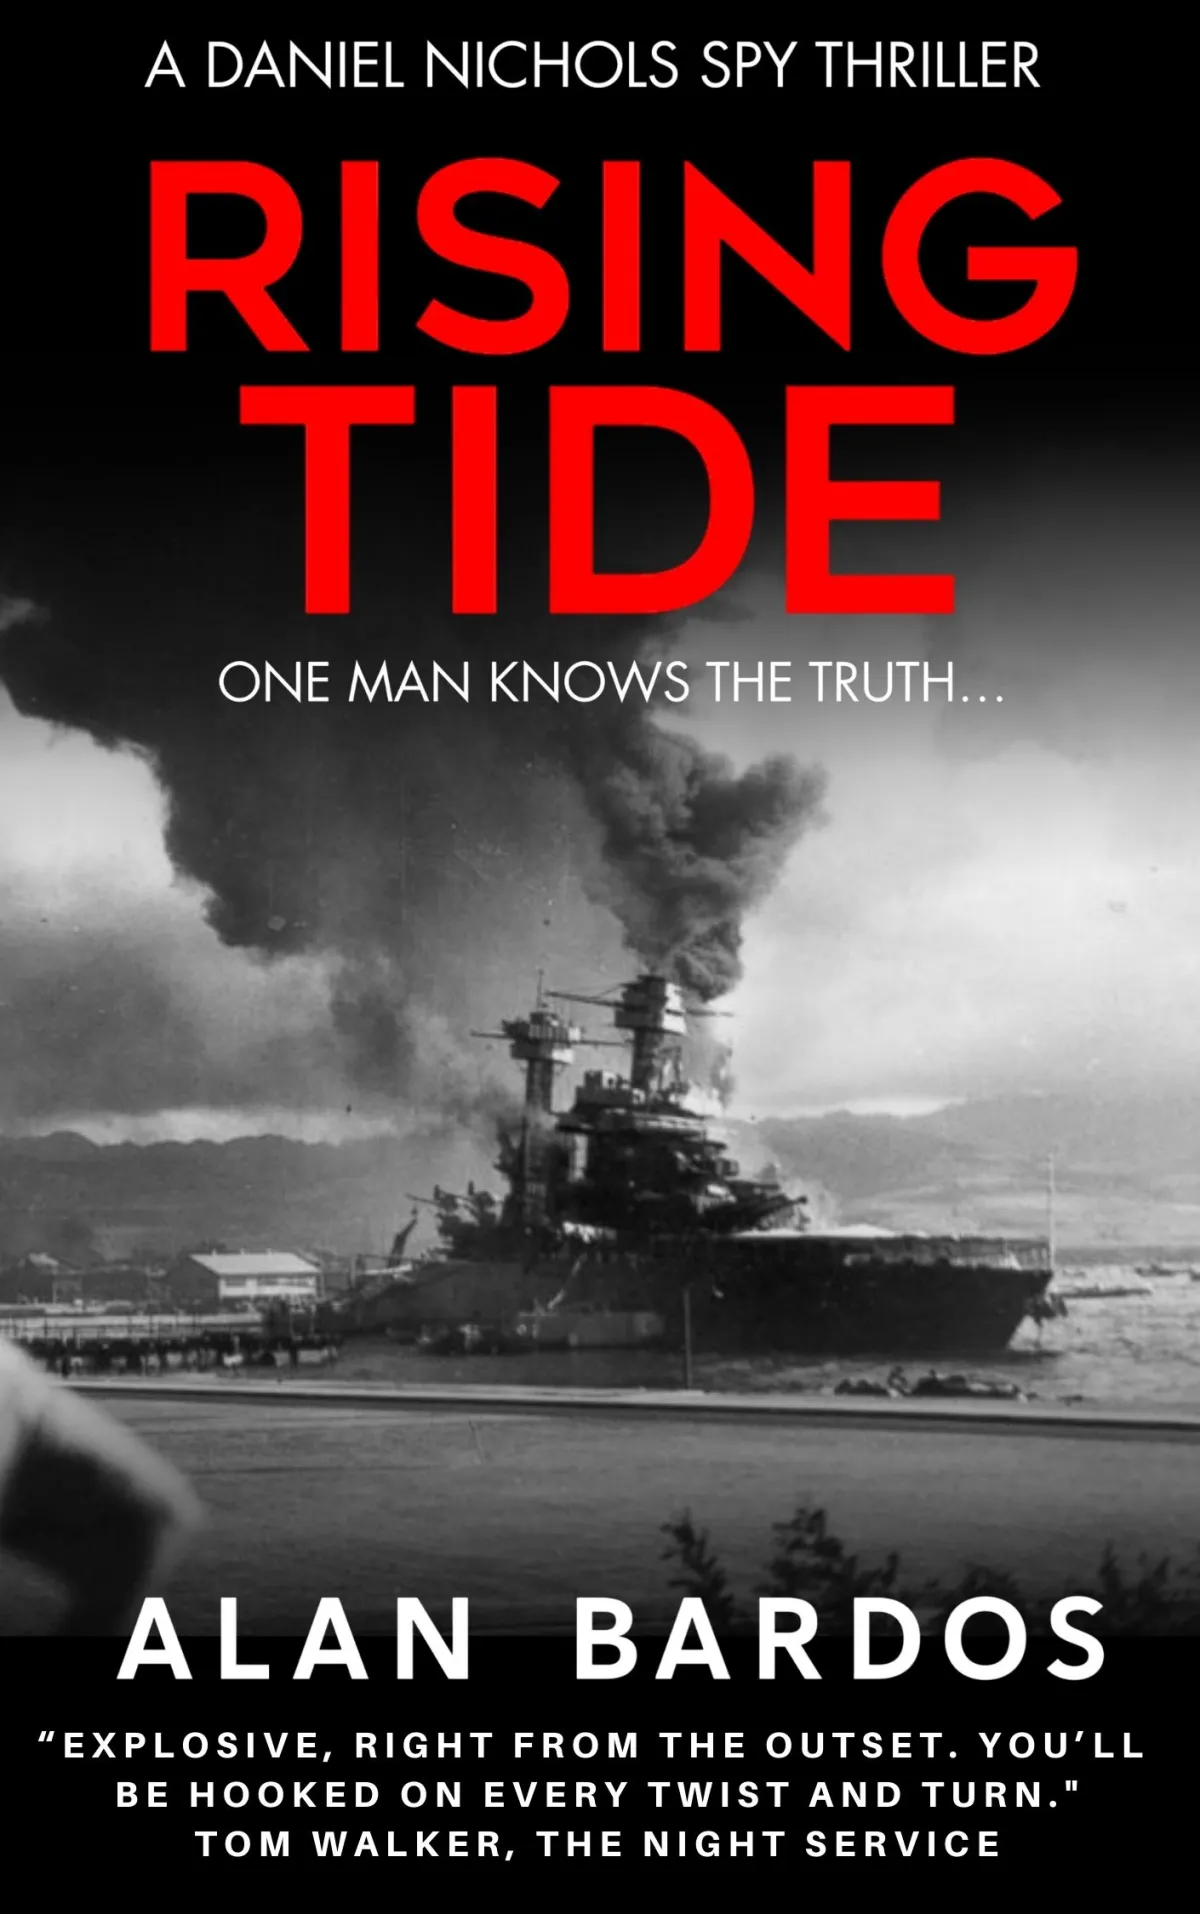 I’m welcoming a returning Alan Bardos to the blog with a fascinating post about Why Japan attacked Pearl Harbor alongside his new book, Rising Tide #historicalfiction